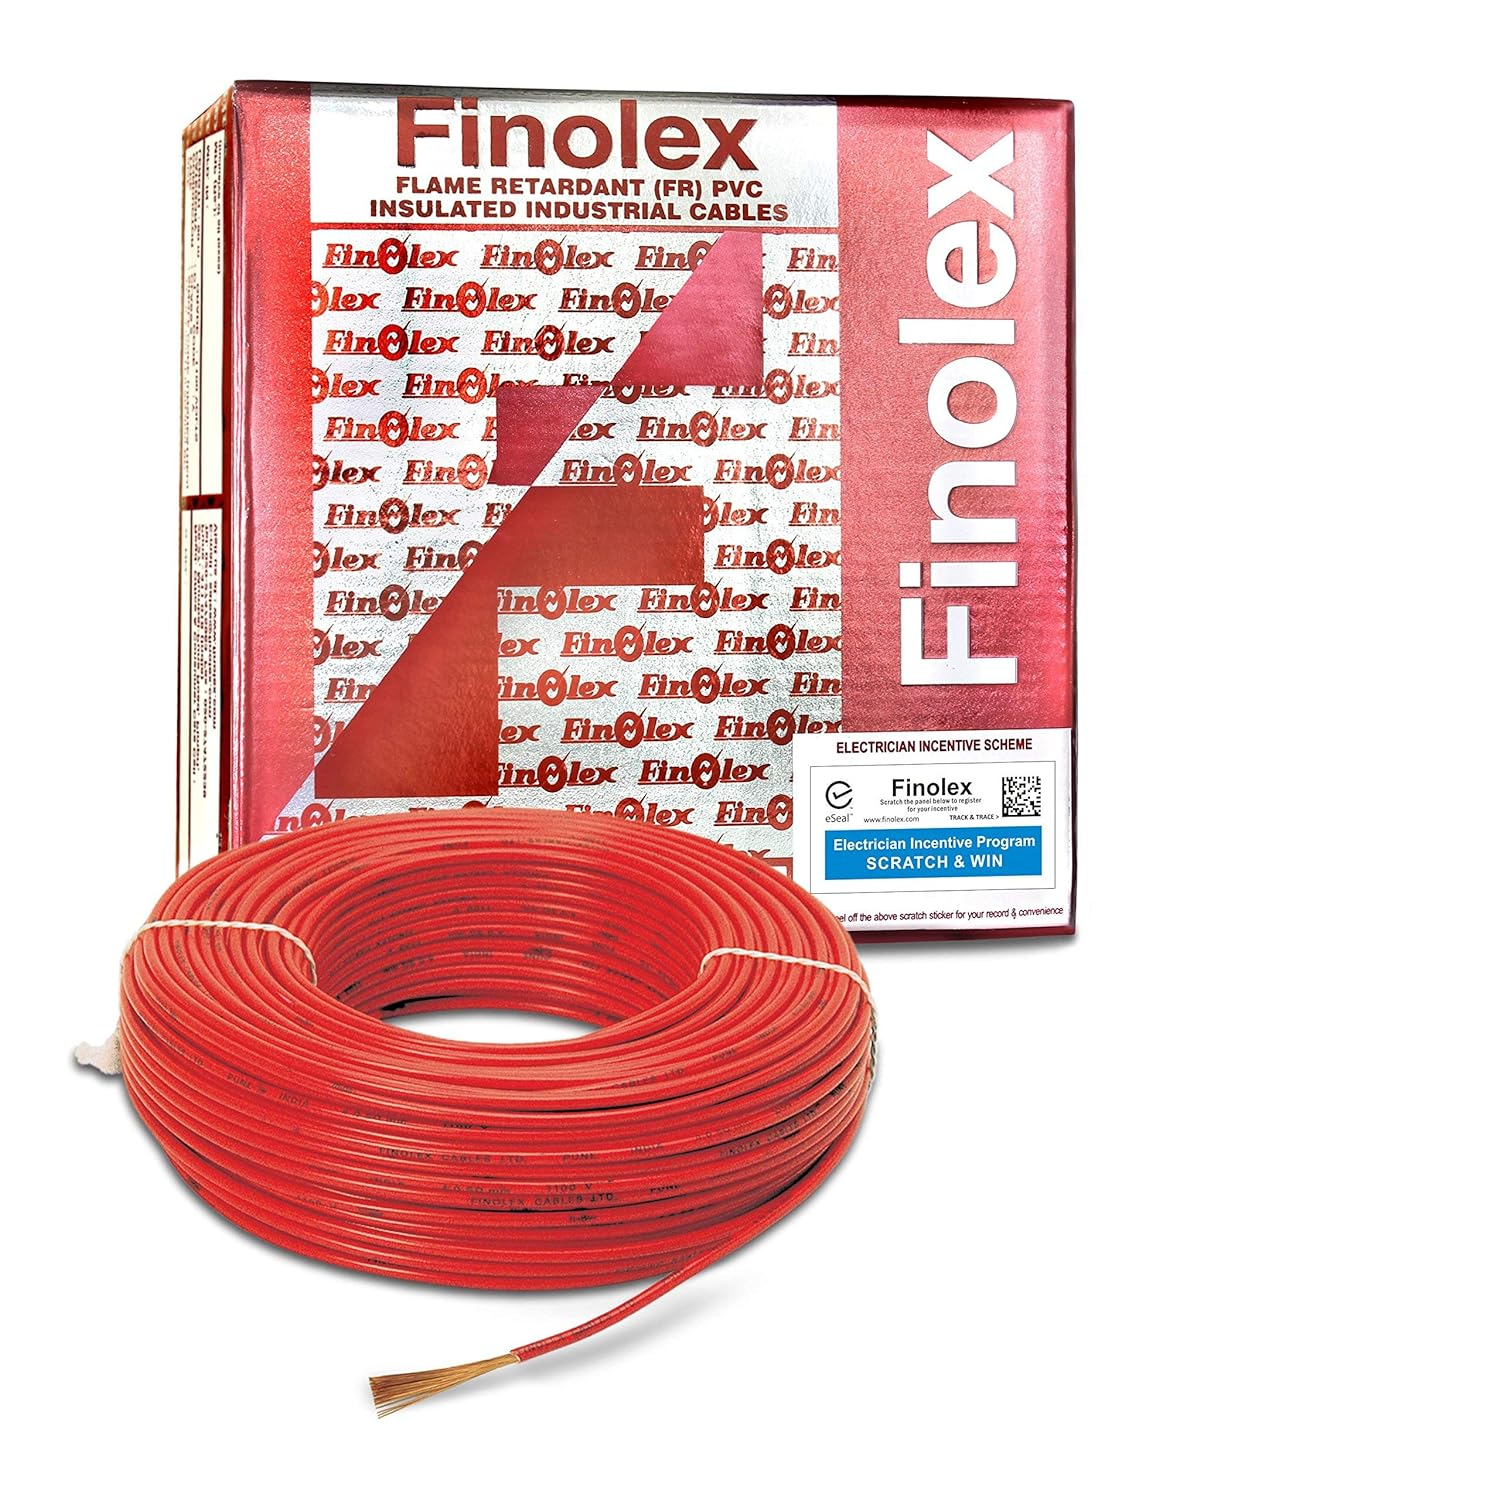 2.5 Sqmm Finolex FR Single Core Copper Wire (90 Mtr) With PVC Insulated for House 38 Industrial Uses